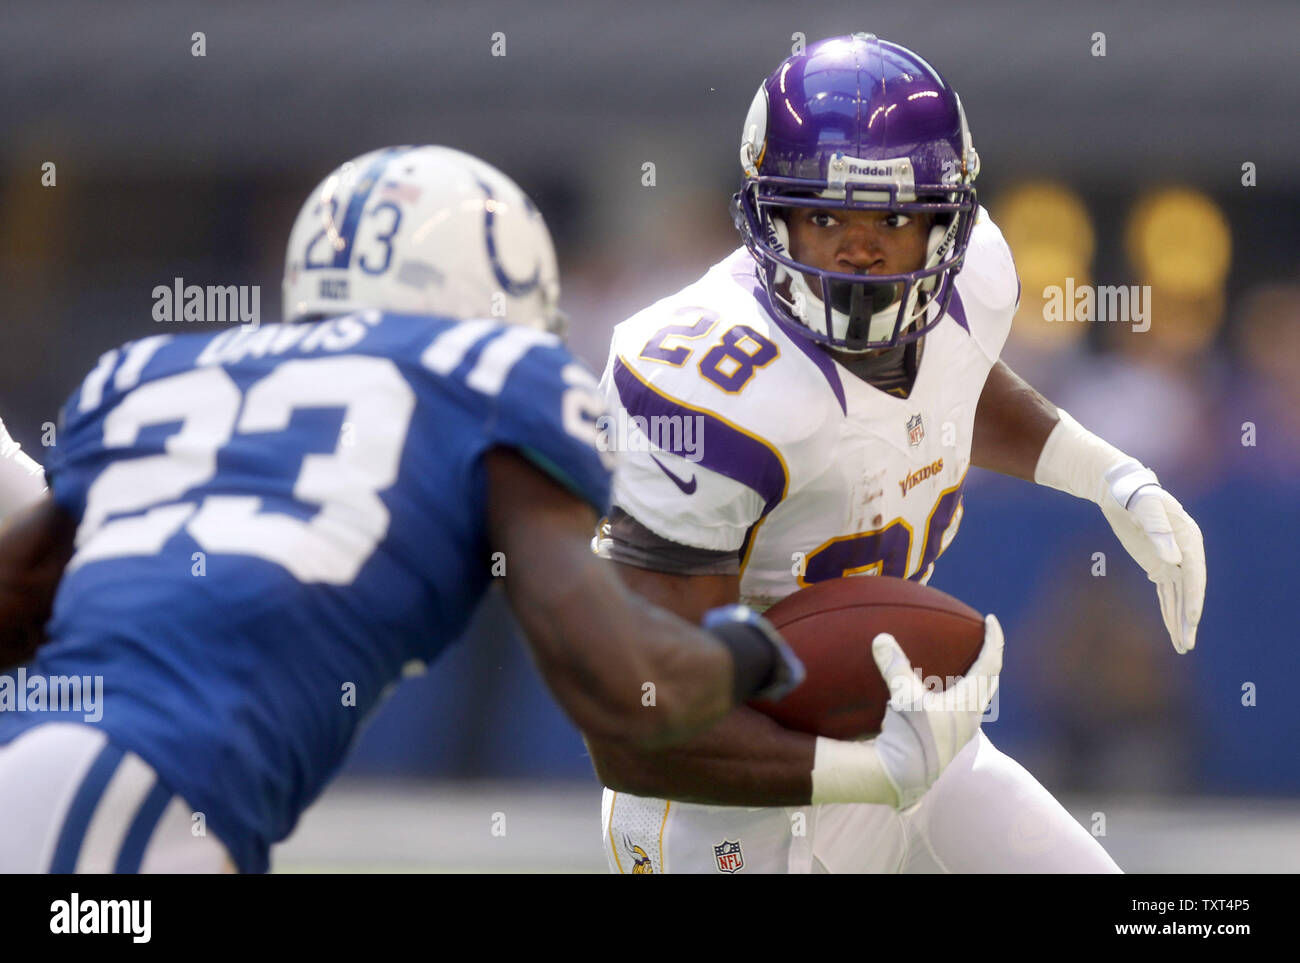 Minnesota Vikings running back Adrian Peterson (28) is pushed out of bounds by Indianapolis Colts cornerback Vontae Davis (23) after a 6-yard gain during the first quarter at Lucas Oil Stadium in Indianapolis, IN., September 16, 2012.  UPI /Mark Cowan Stock Photo